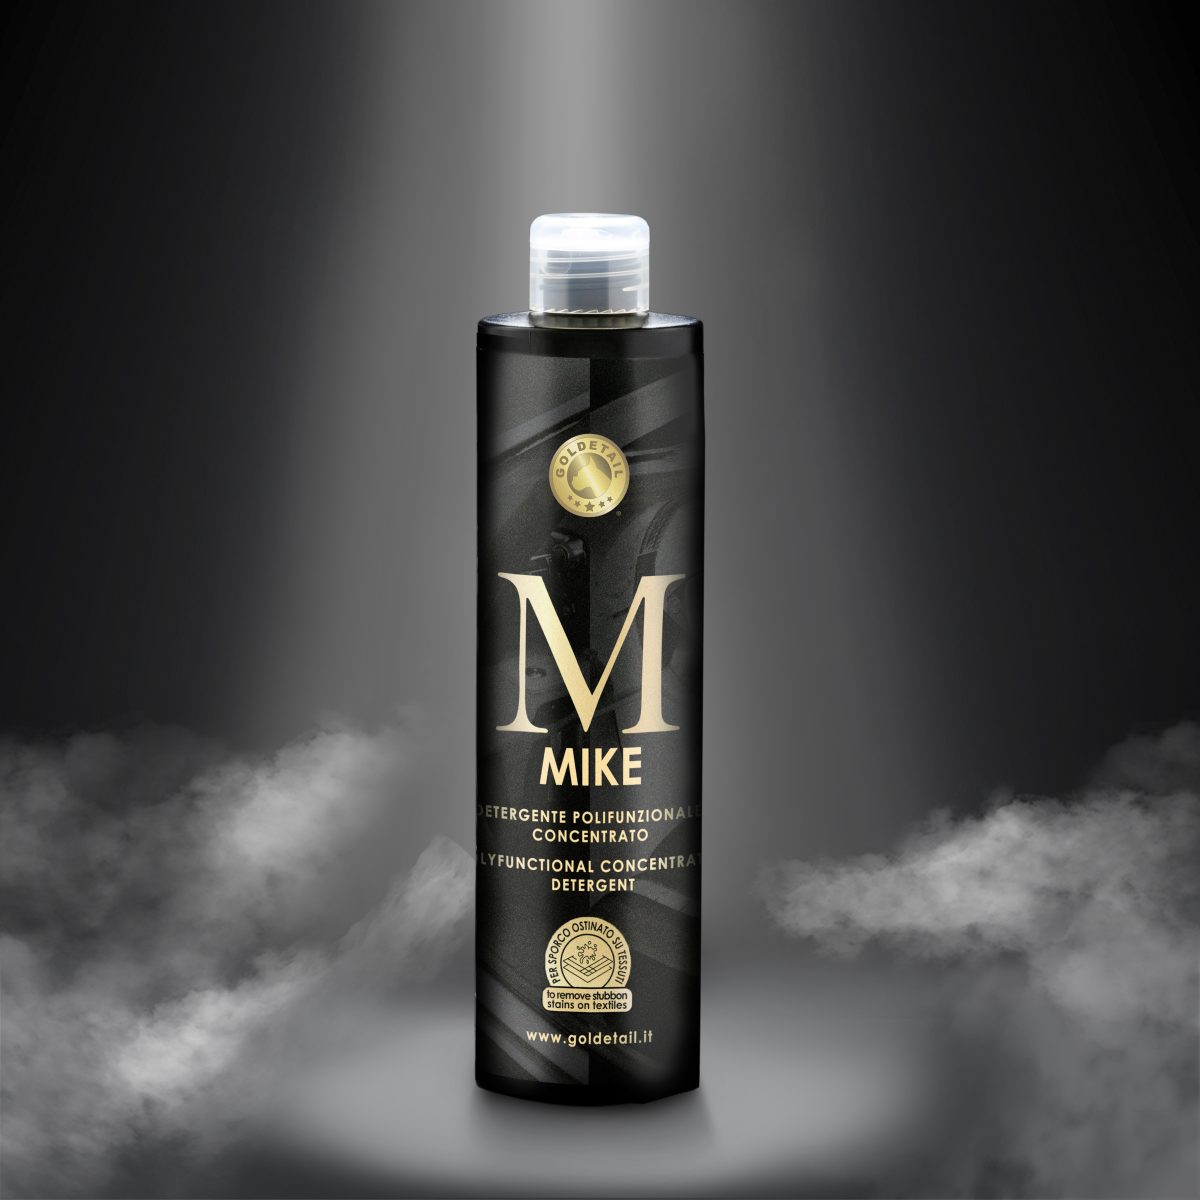 Bottle of Mike Polyfunctional Concentrate Detergent